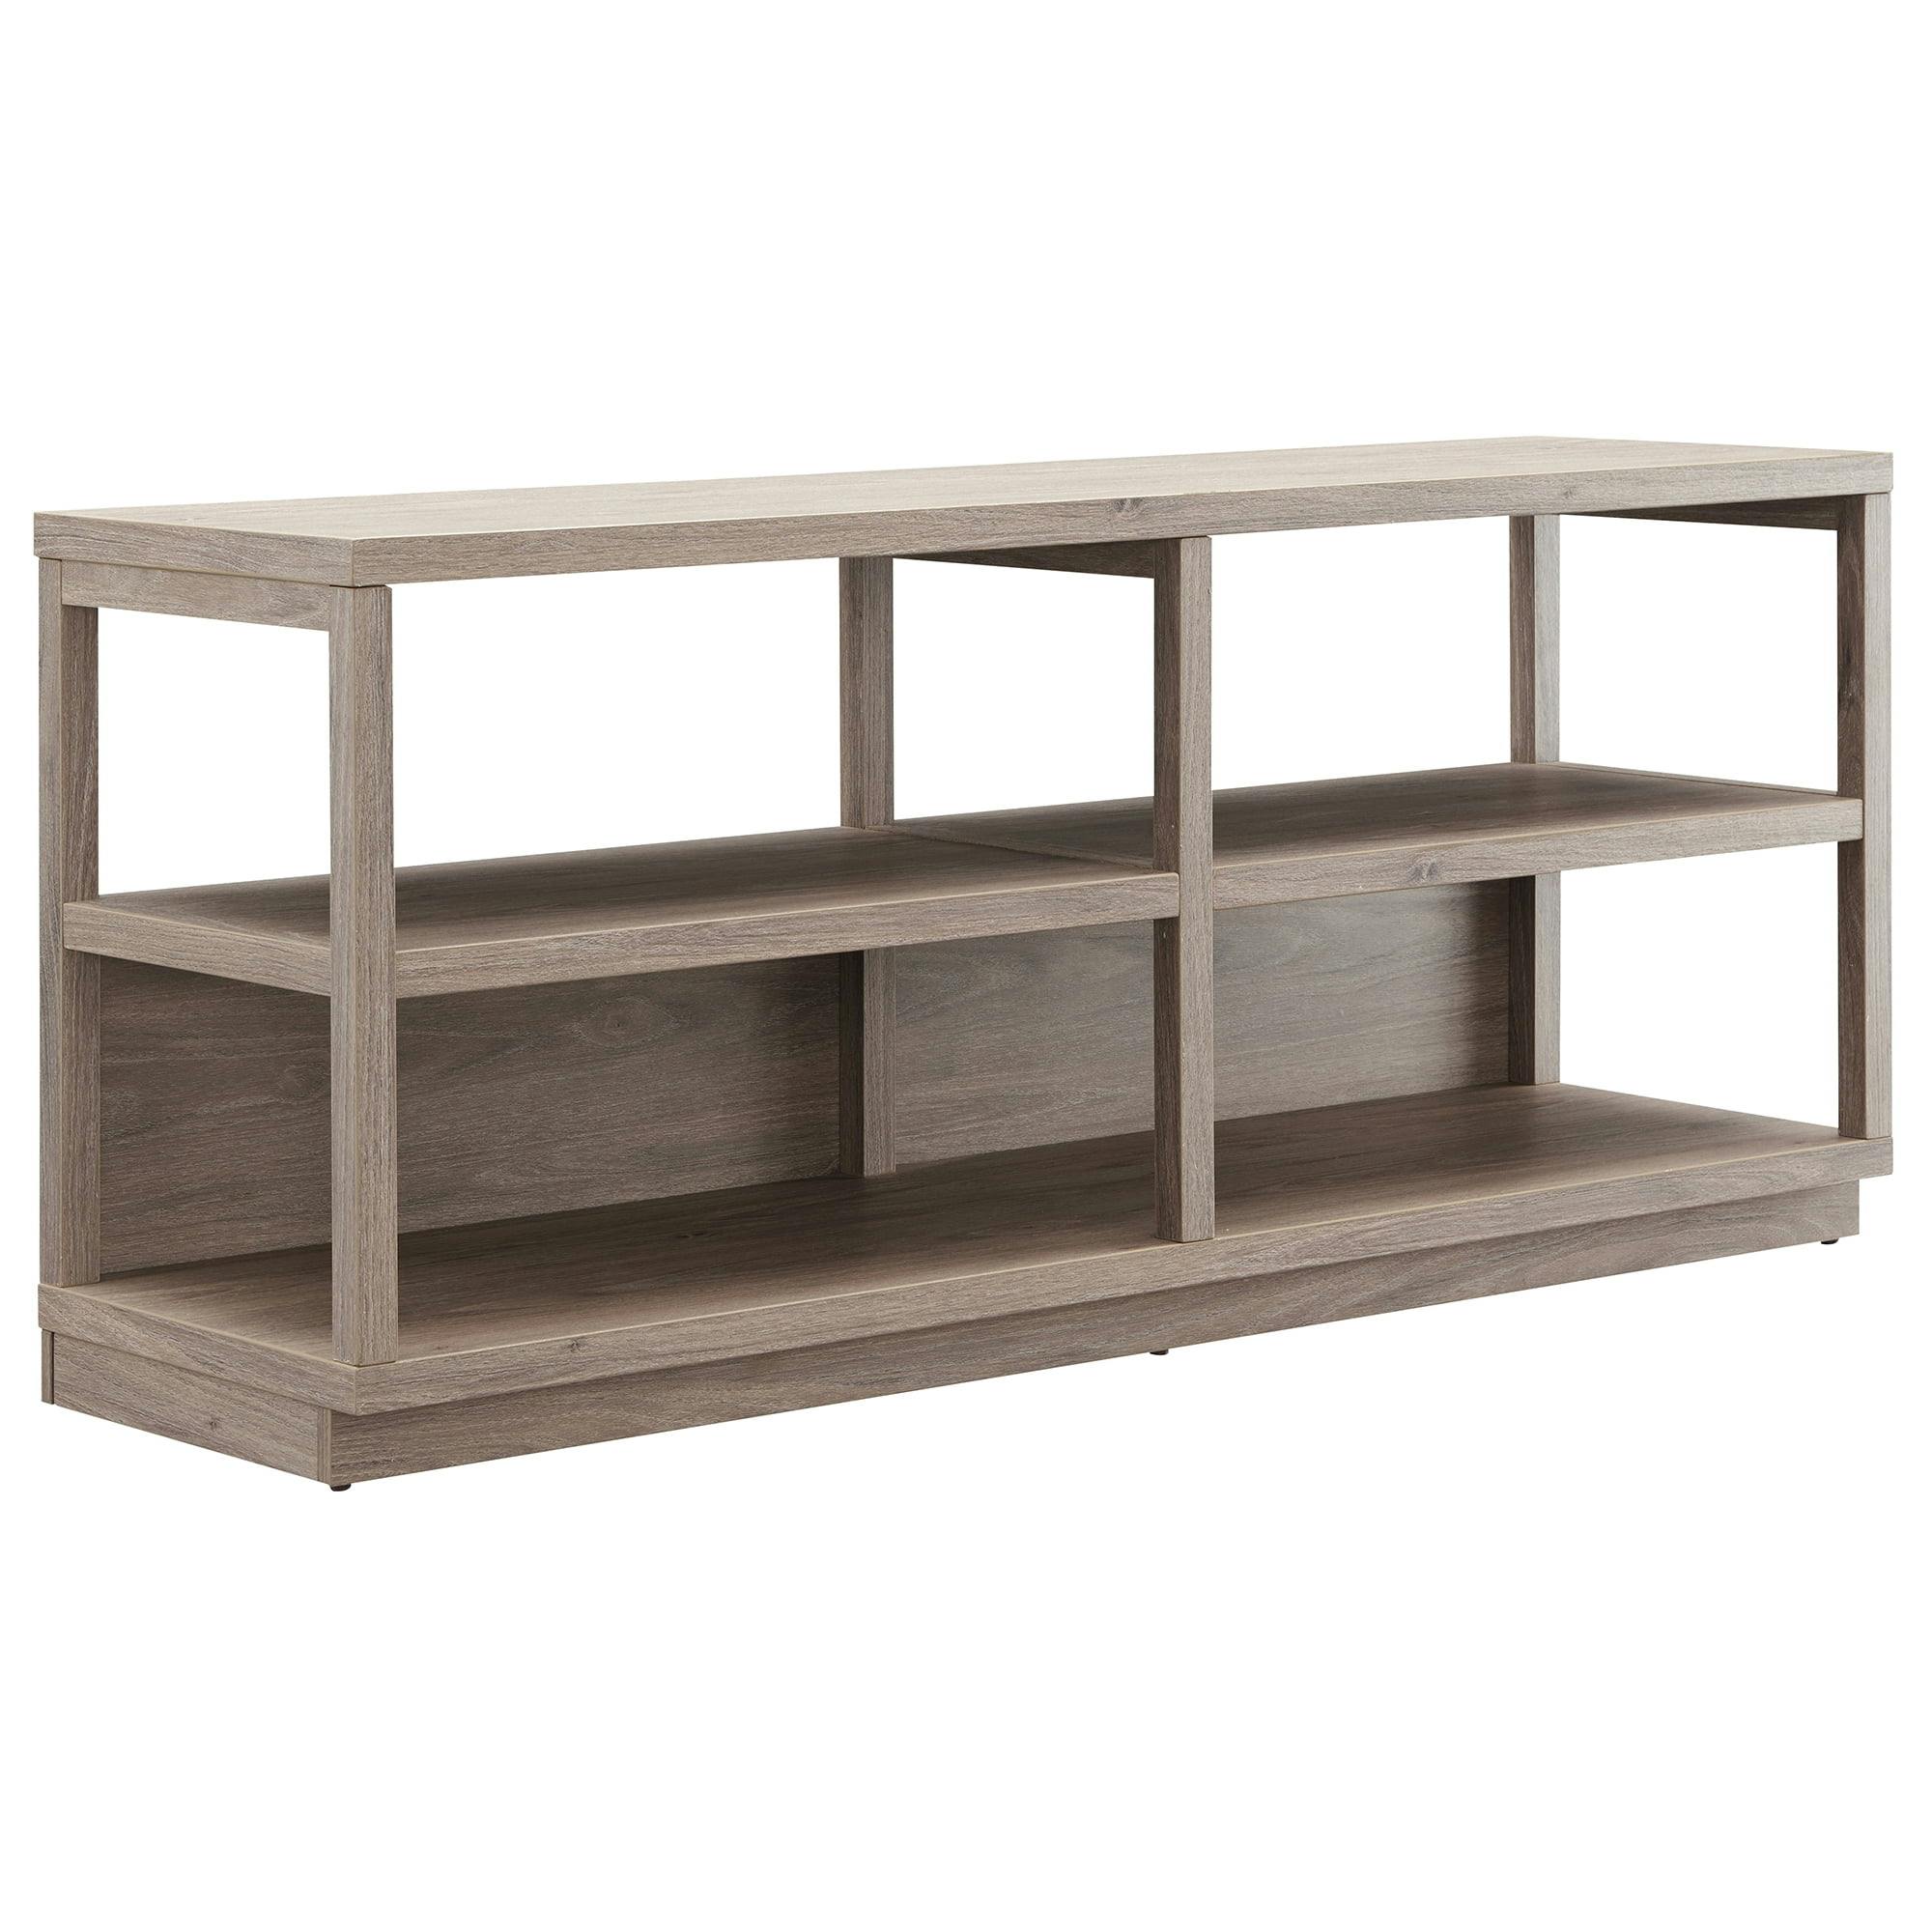 Antiqued Gray Oak 55" Simplistic TV Stand for Modern Homes